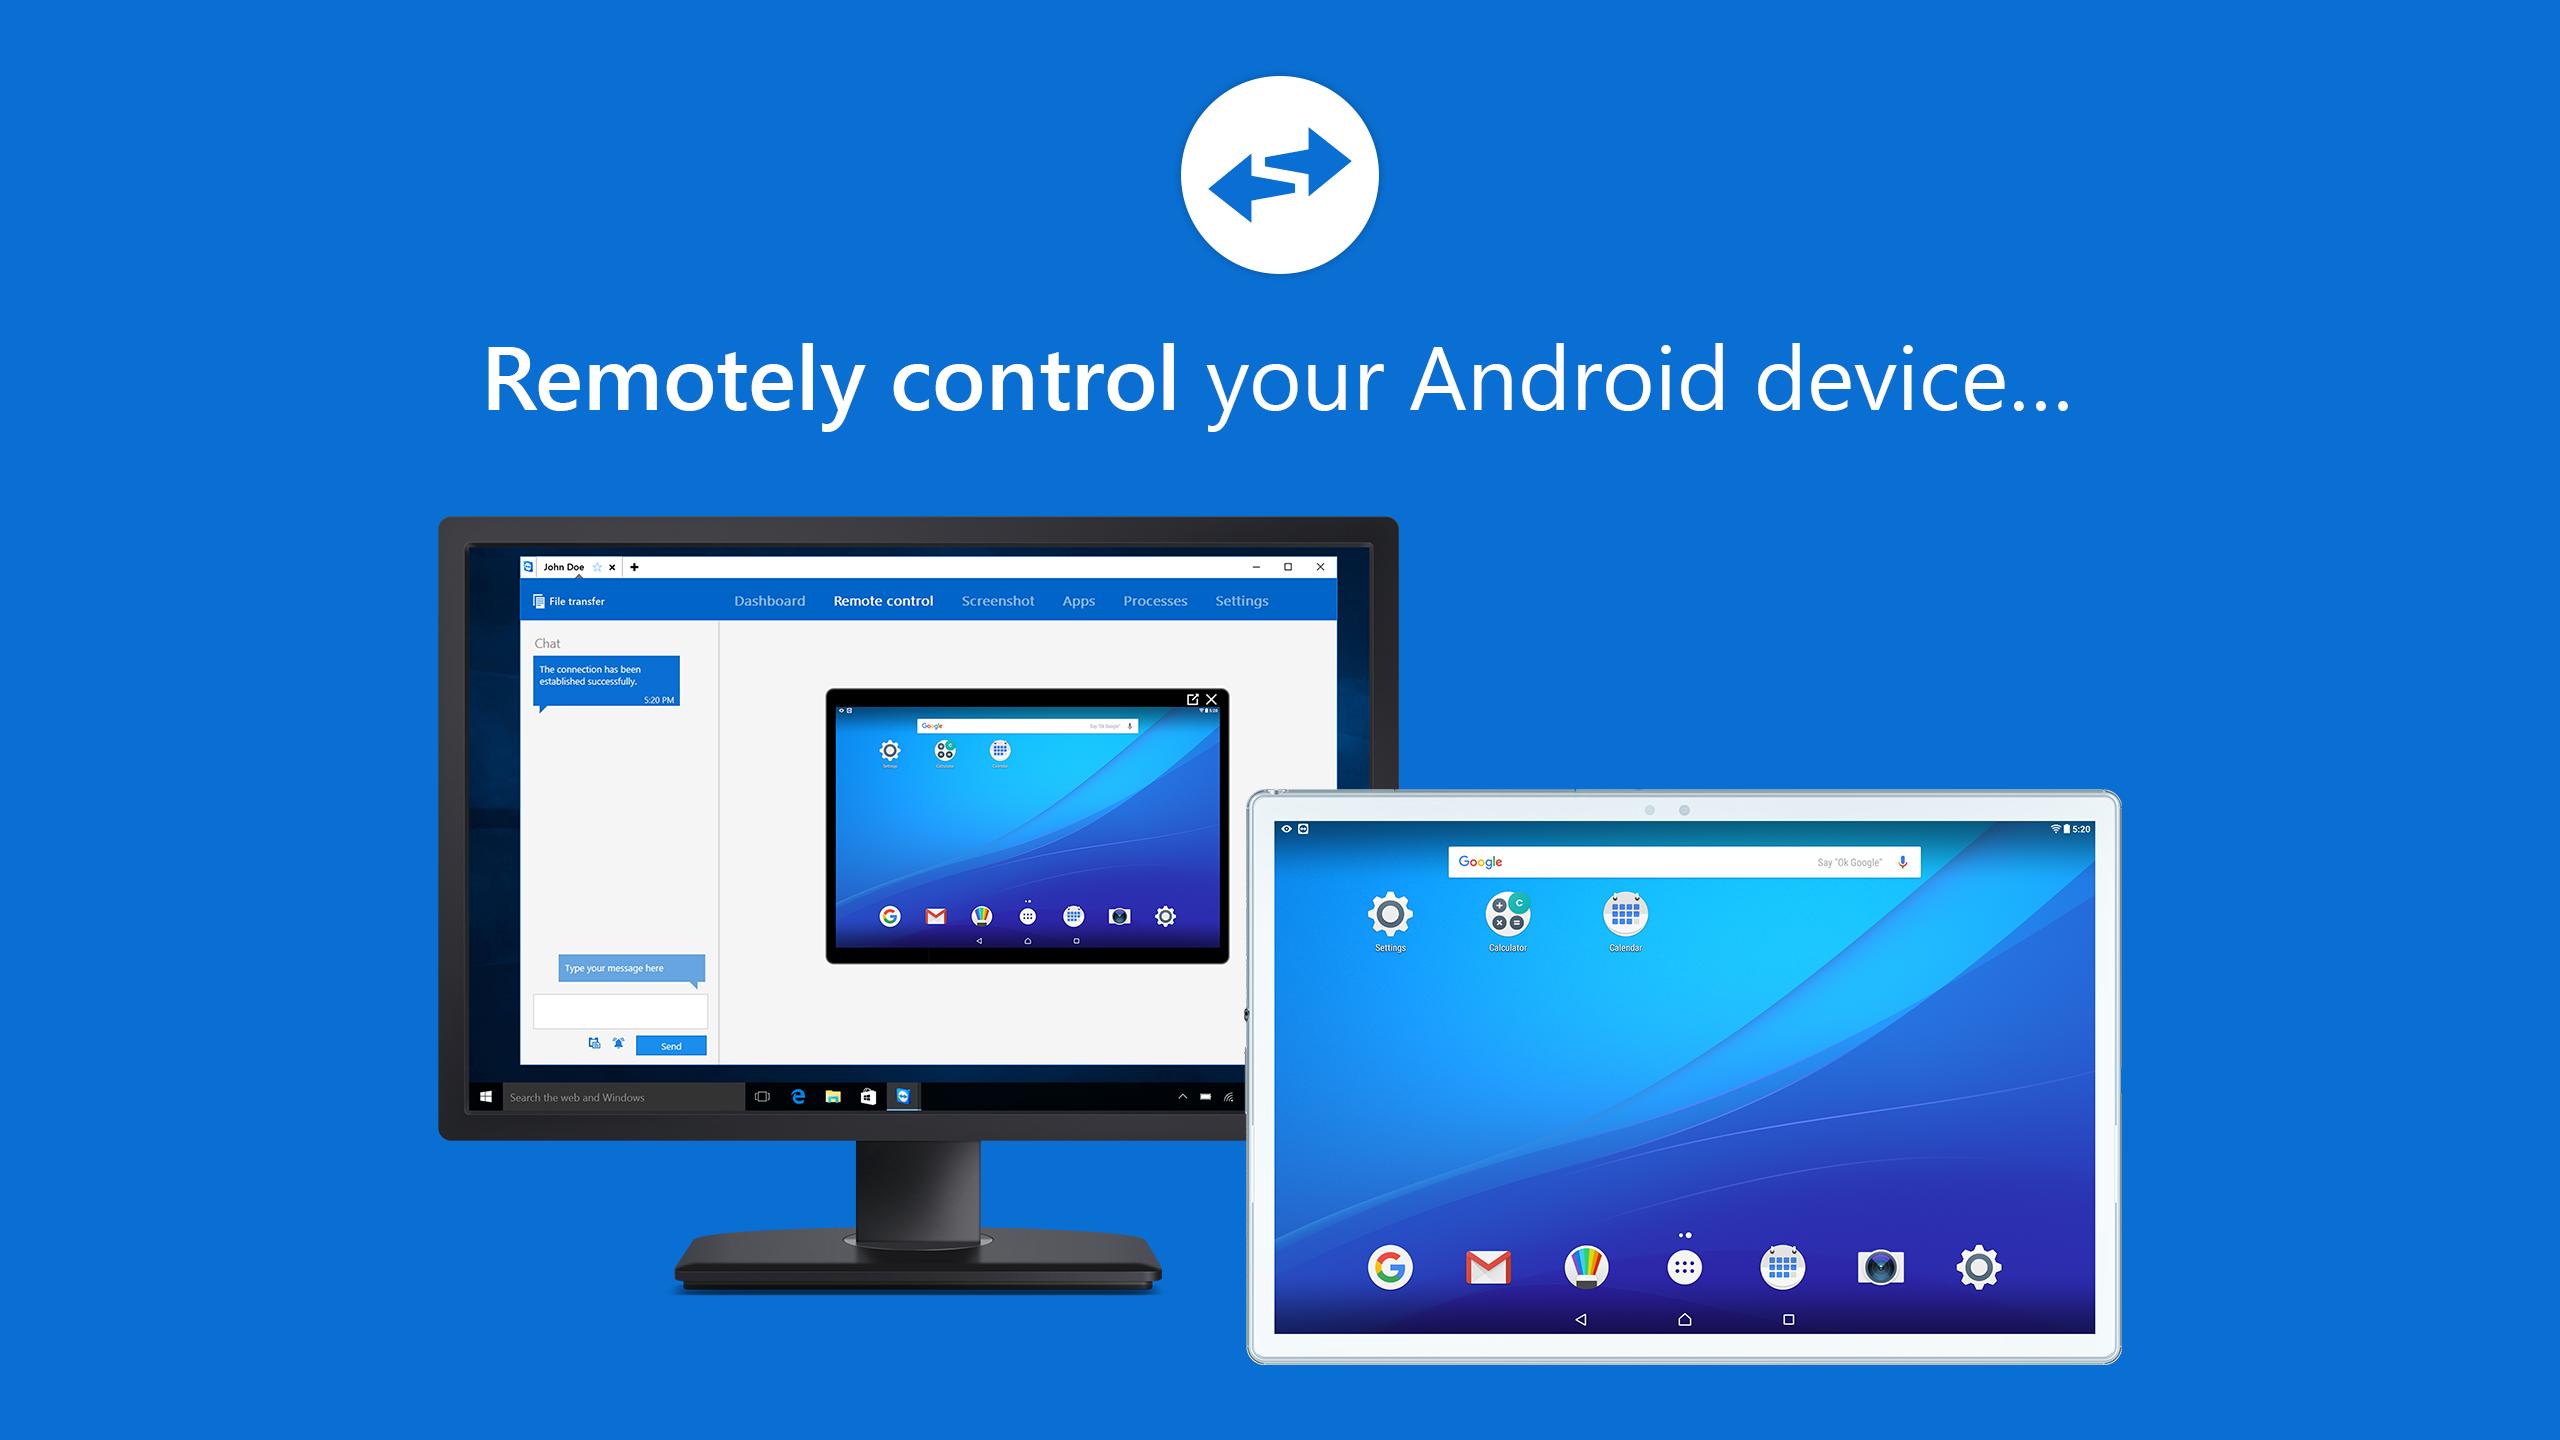 download teamviewer apk for android